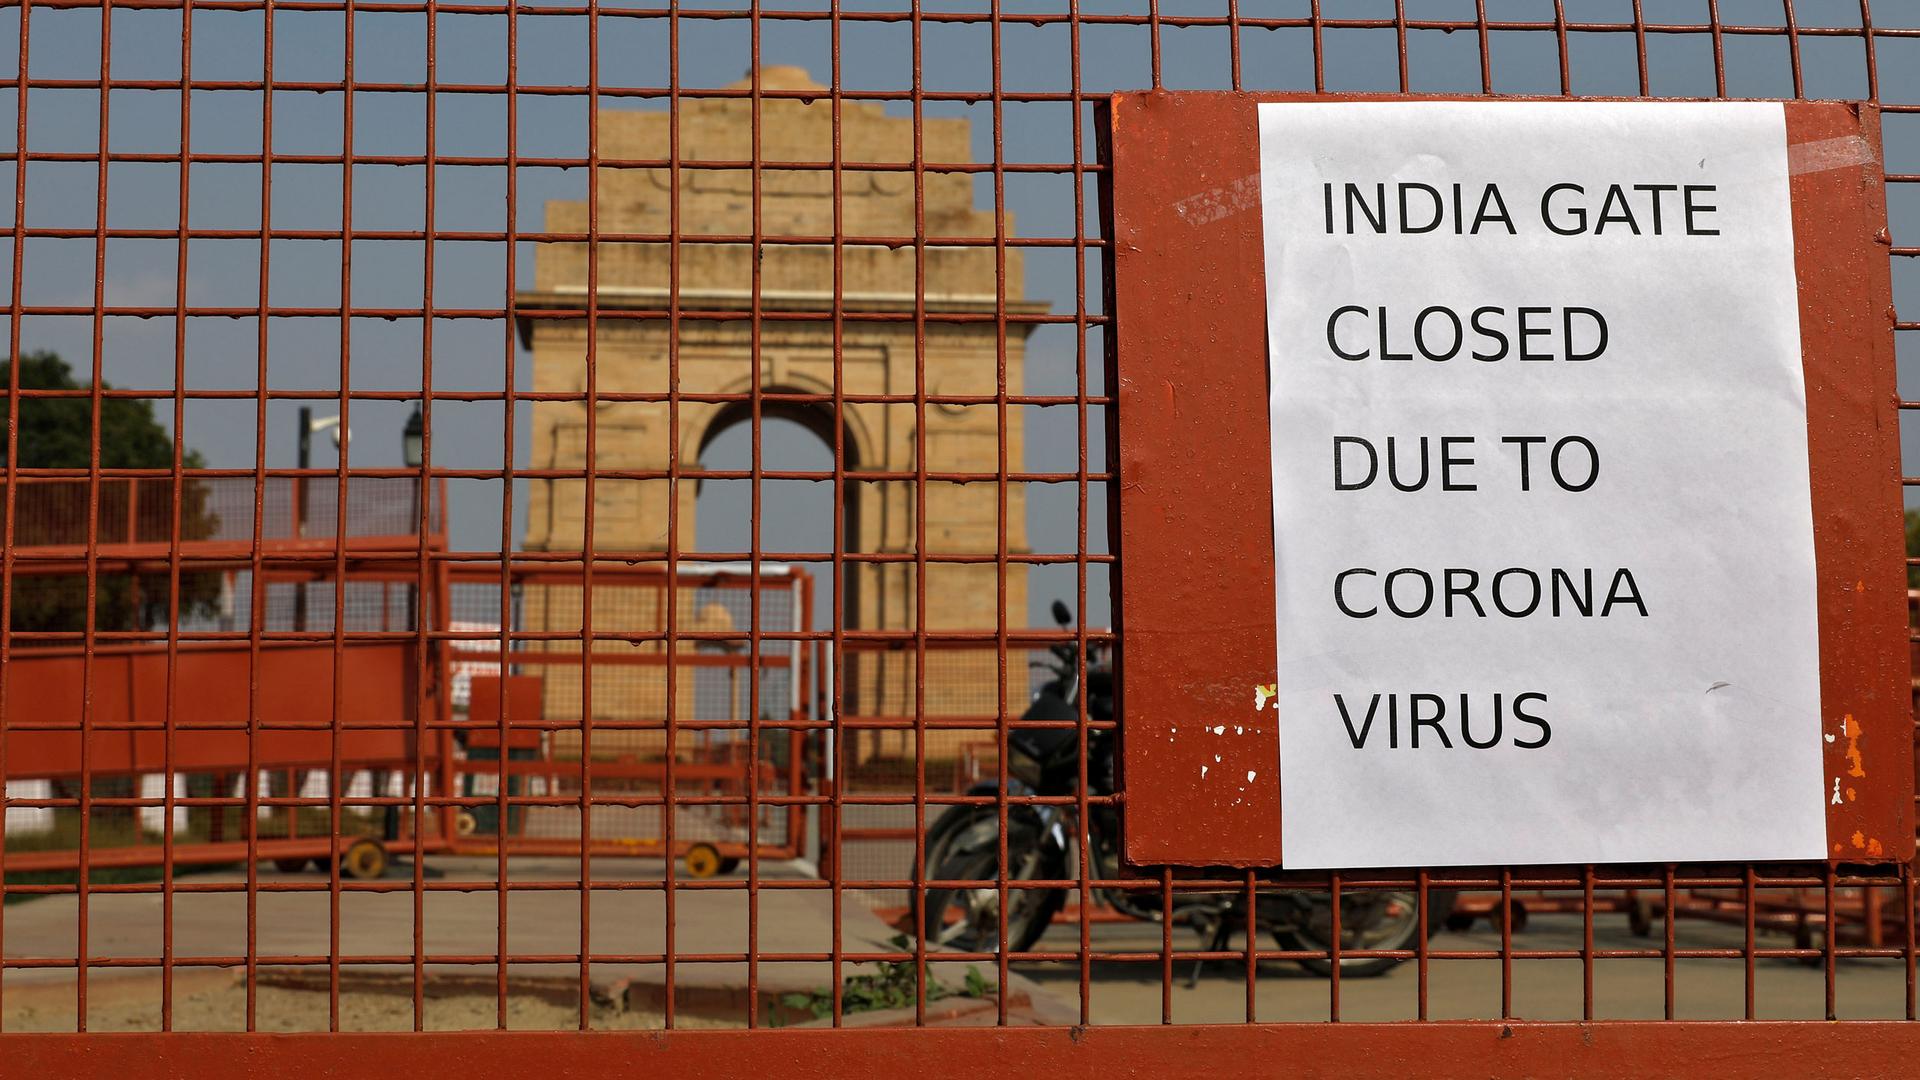 A close-up photograph of a reddish metal gate with a motorcycle parked behind it and the India Gate war memorial is shown off in the distance.